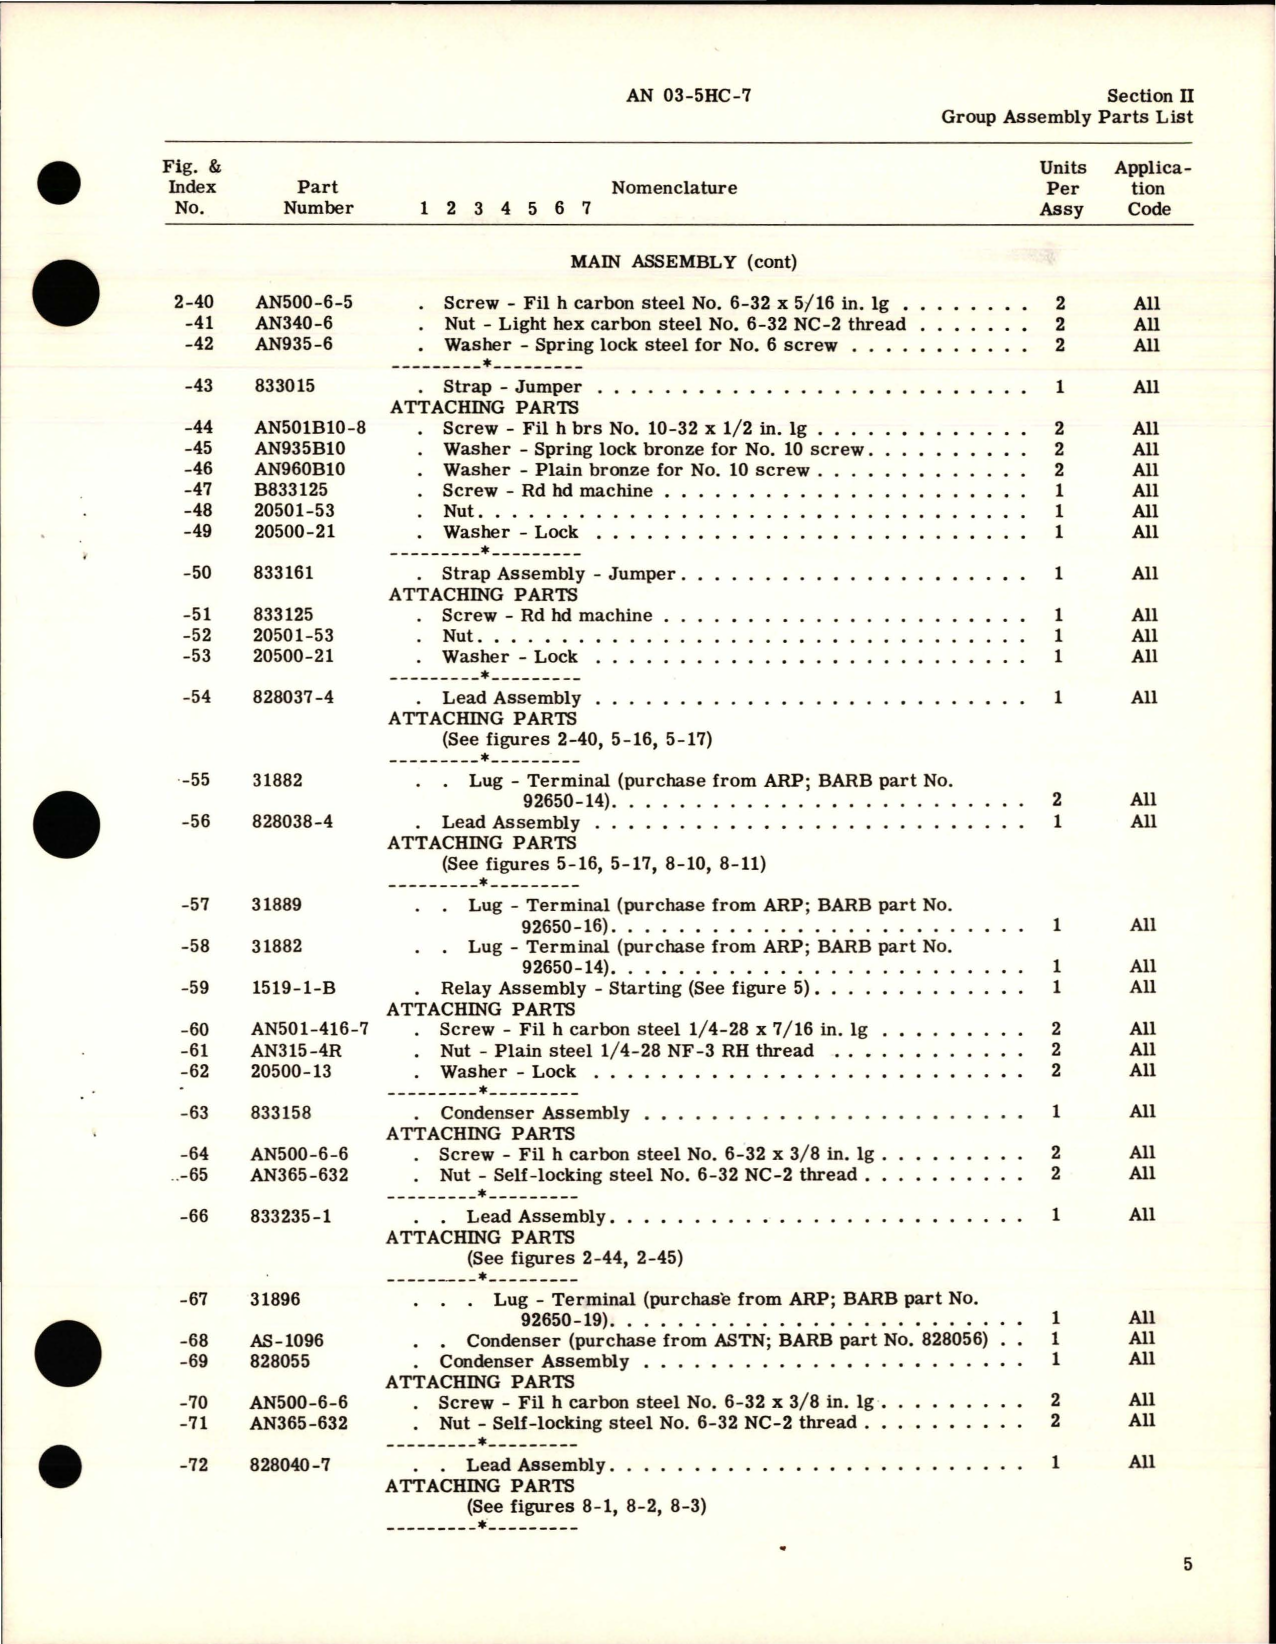 Sample page 9 from AirCorps Library document: Parts Catalog for Inverter 